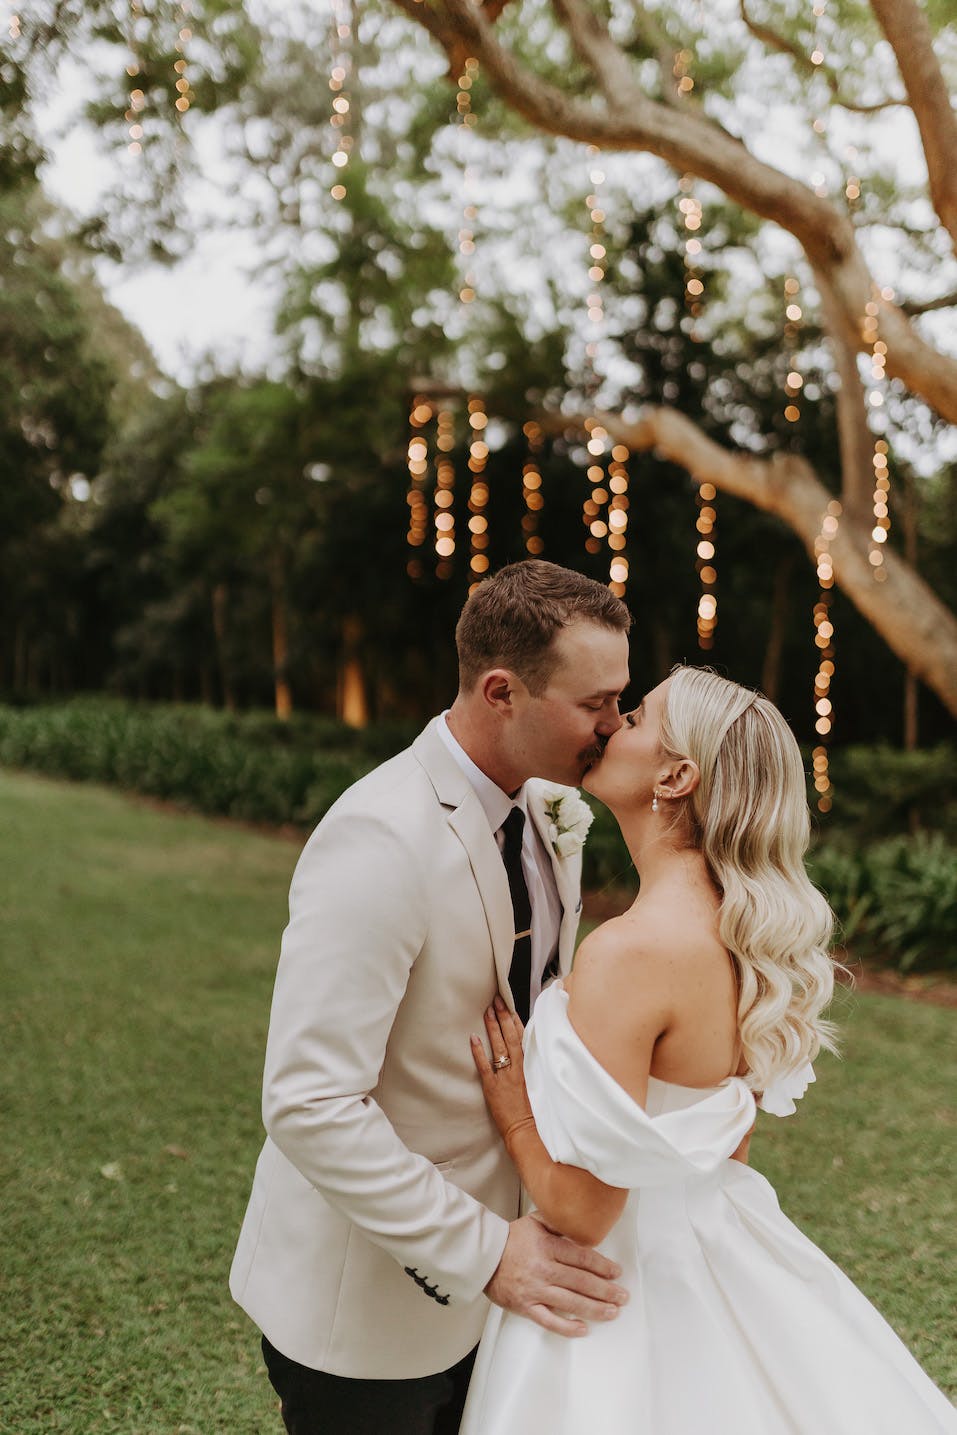 A couple in wedding attire share a kiss outdoors. The groom is wearing a beige suit, and the bride is in an off-the-shoulder white gown. They are standing in a grassy area with trees and string lights glowing in the background.